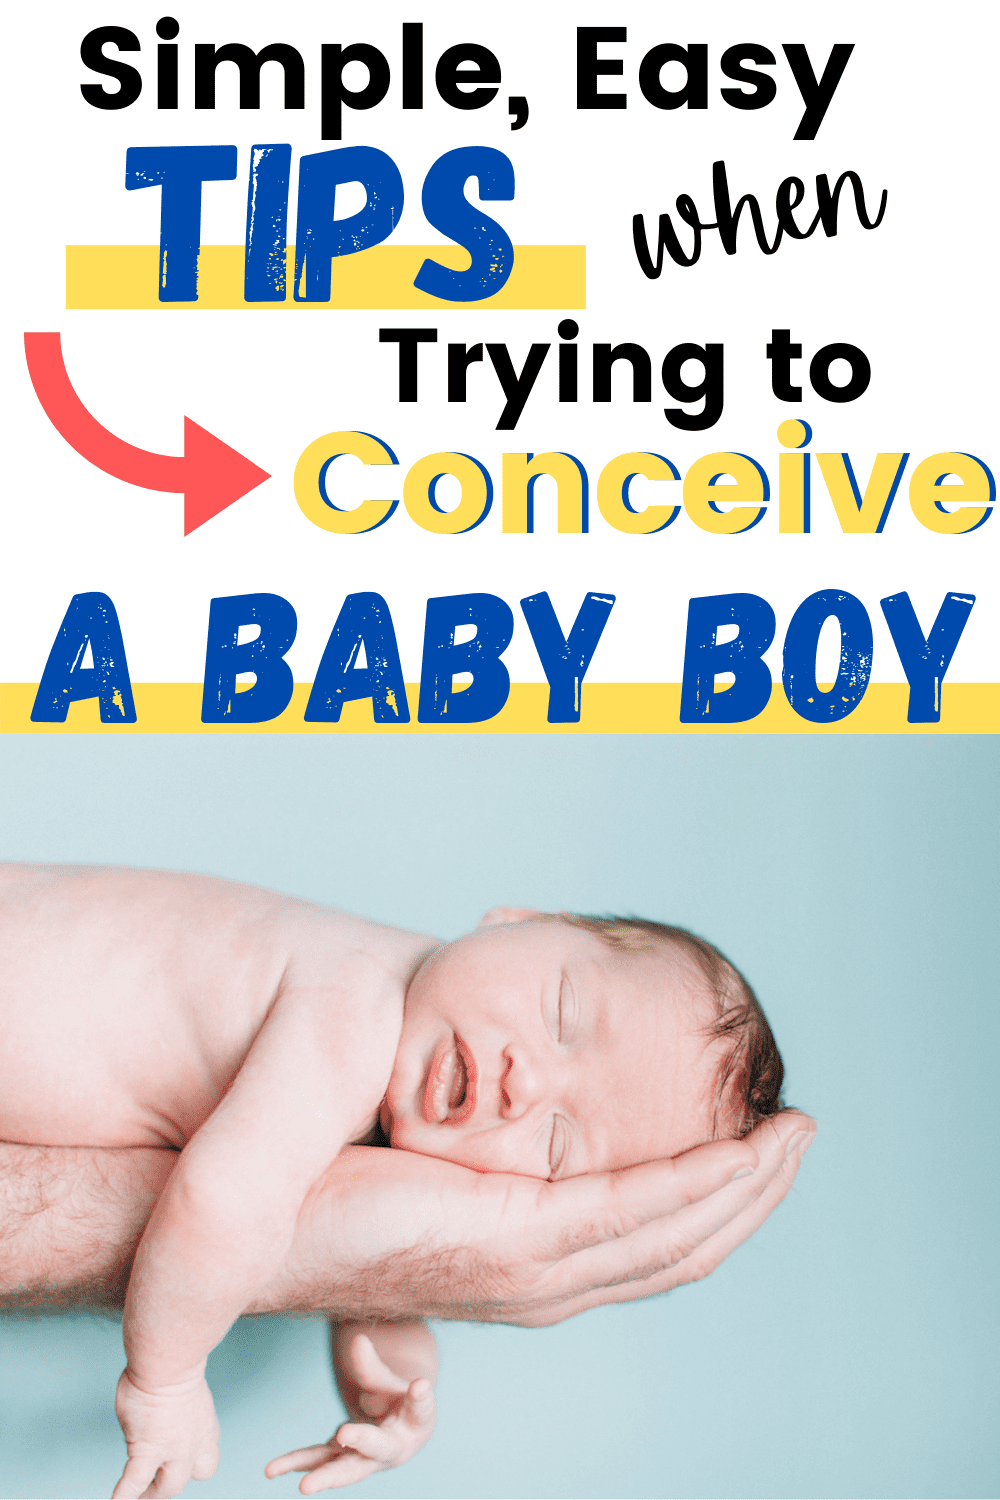 Are you trying to conceive a baby boy? Here are some easy, natural, non-invasive methods said to increase your chances of having a boy!